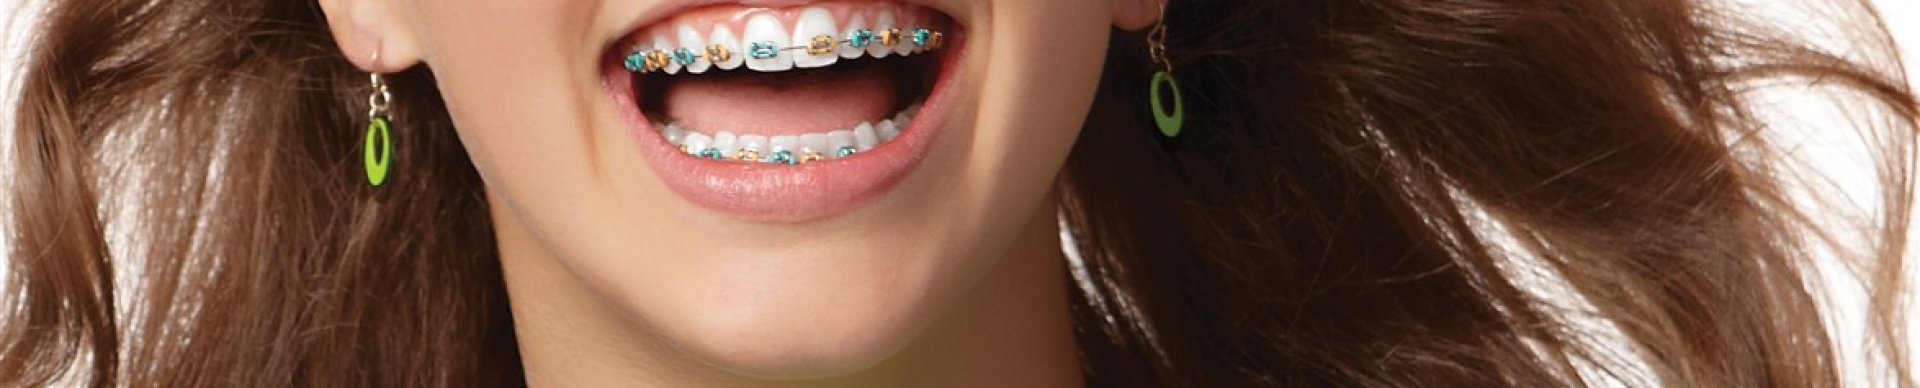 Metal Braces – the new bling?